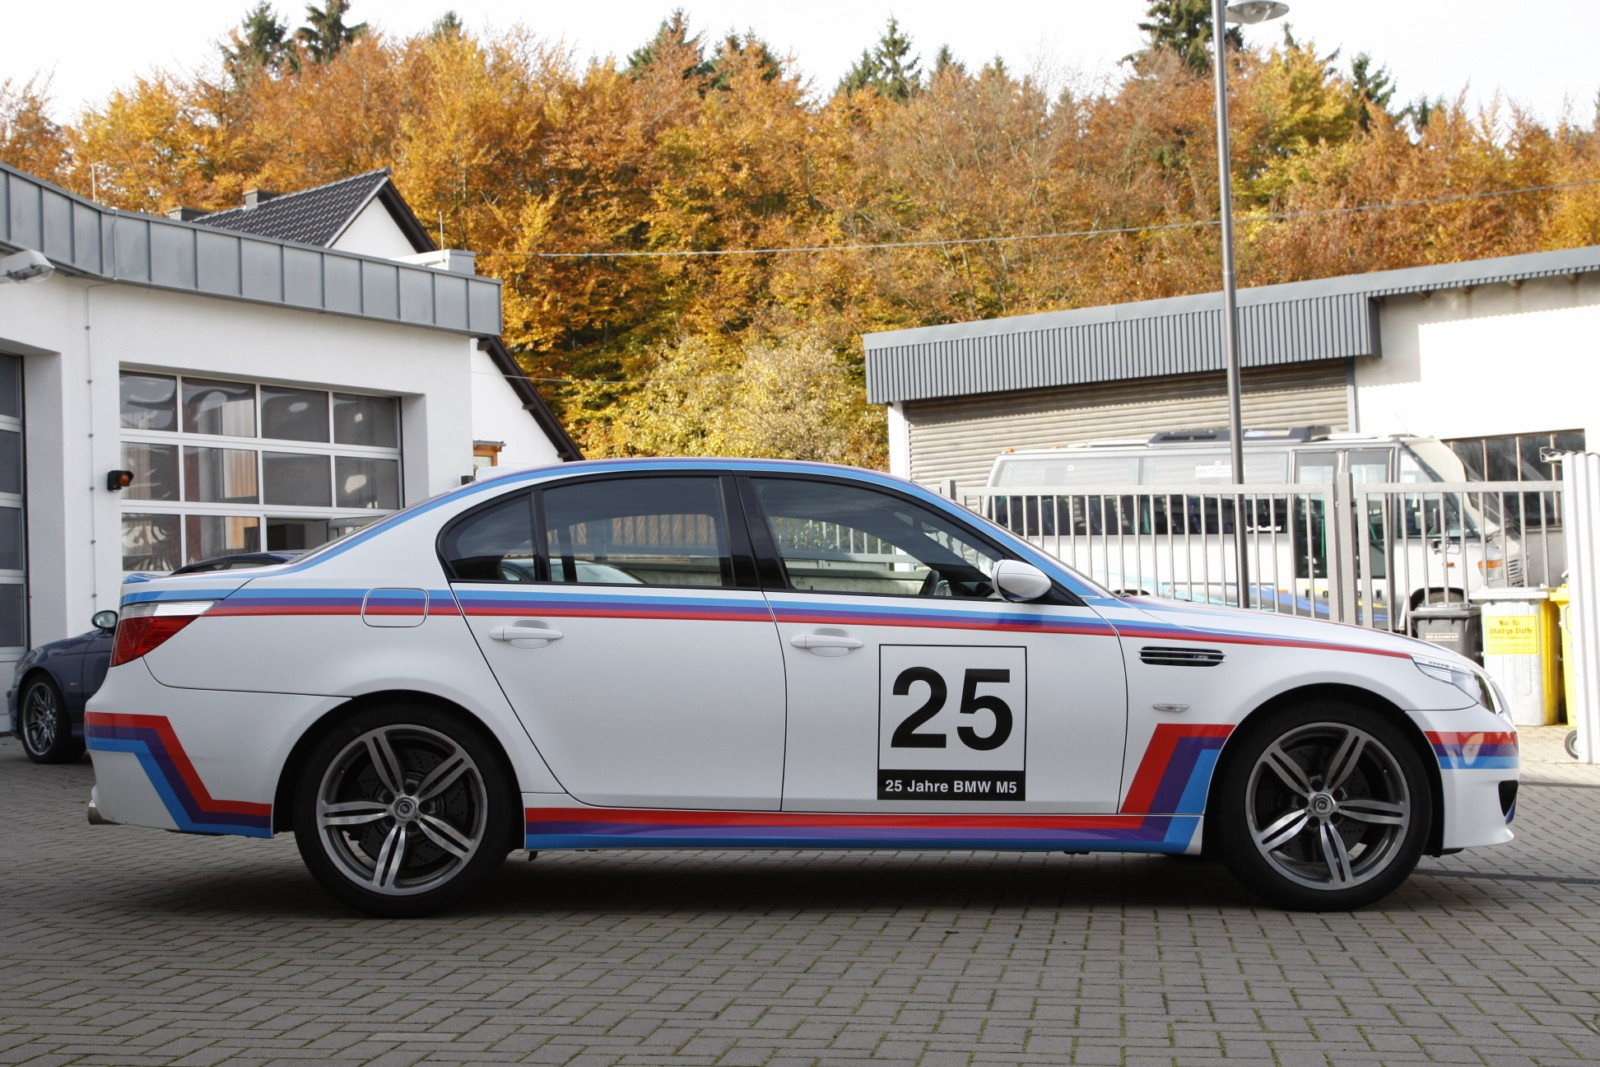 This is the one-off 550bhp secret BMW M5 CSL